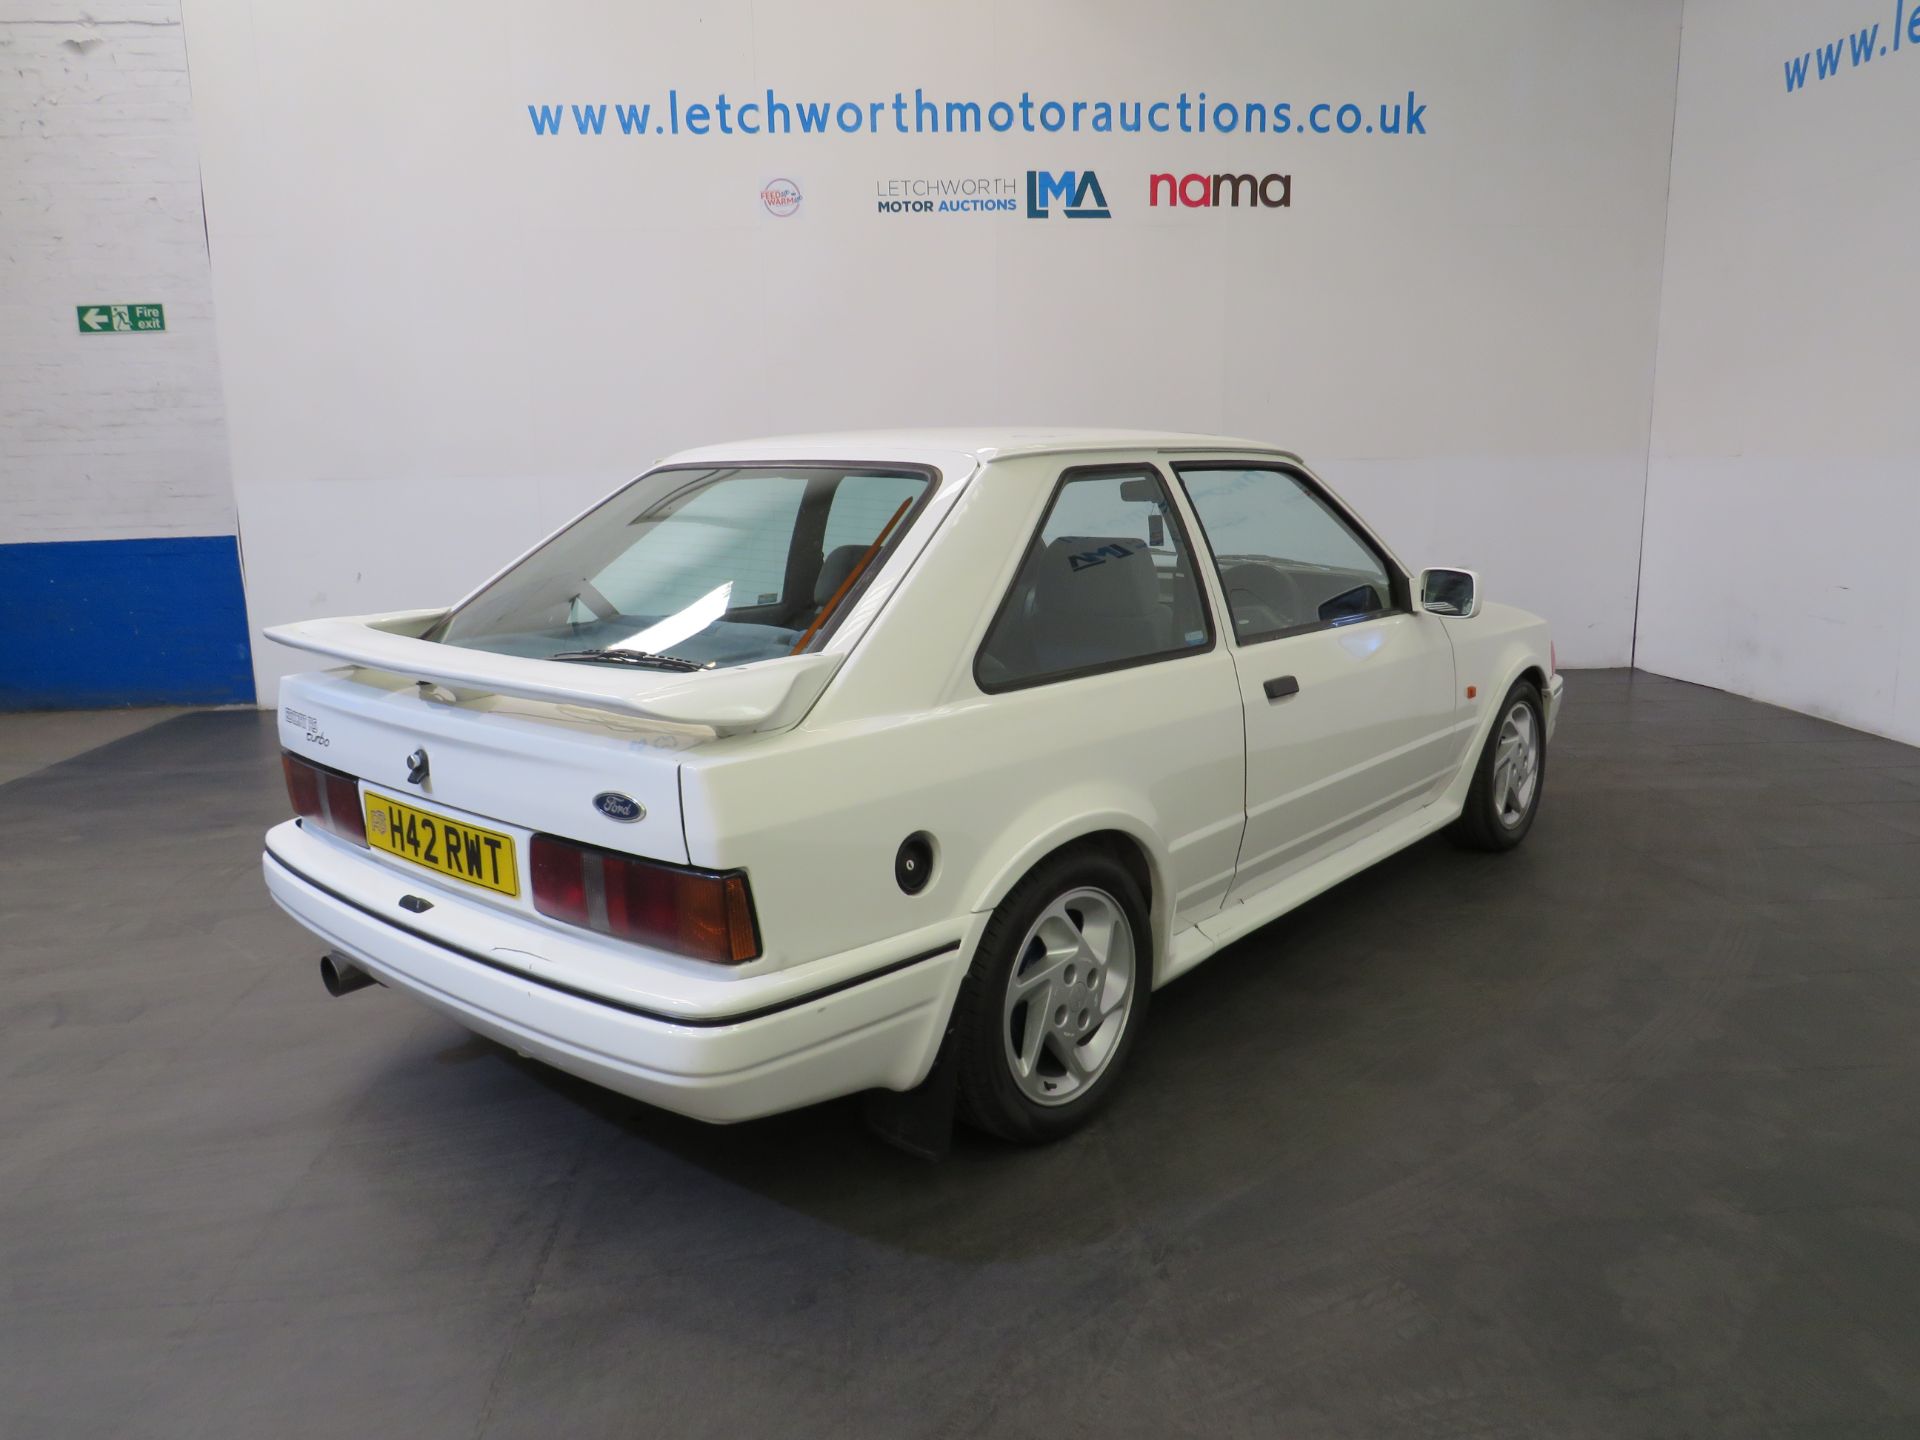 1990 Ford Escort RS Turbo - 1597cc - Image 6 of 15